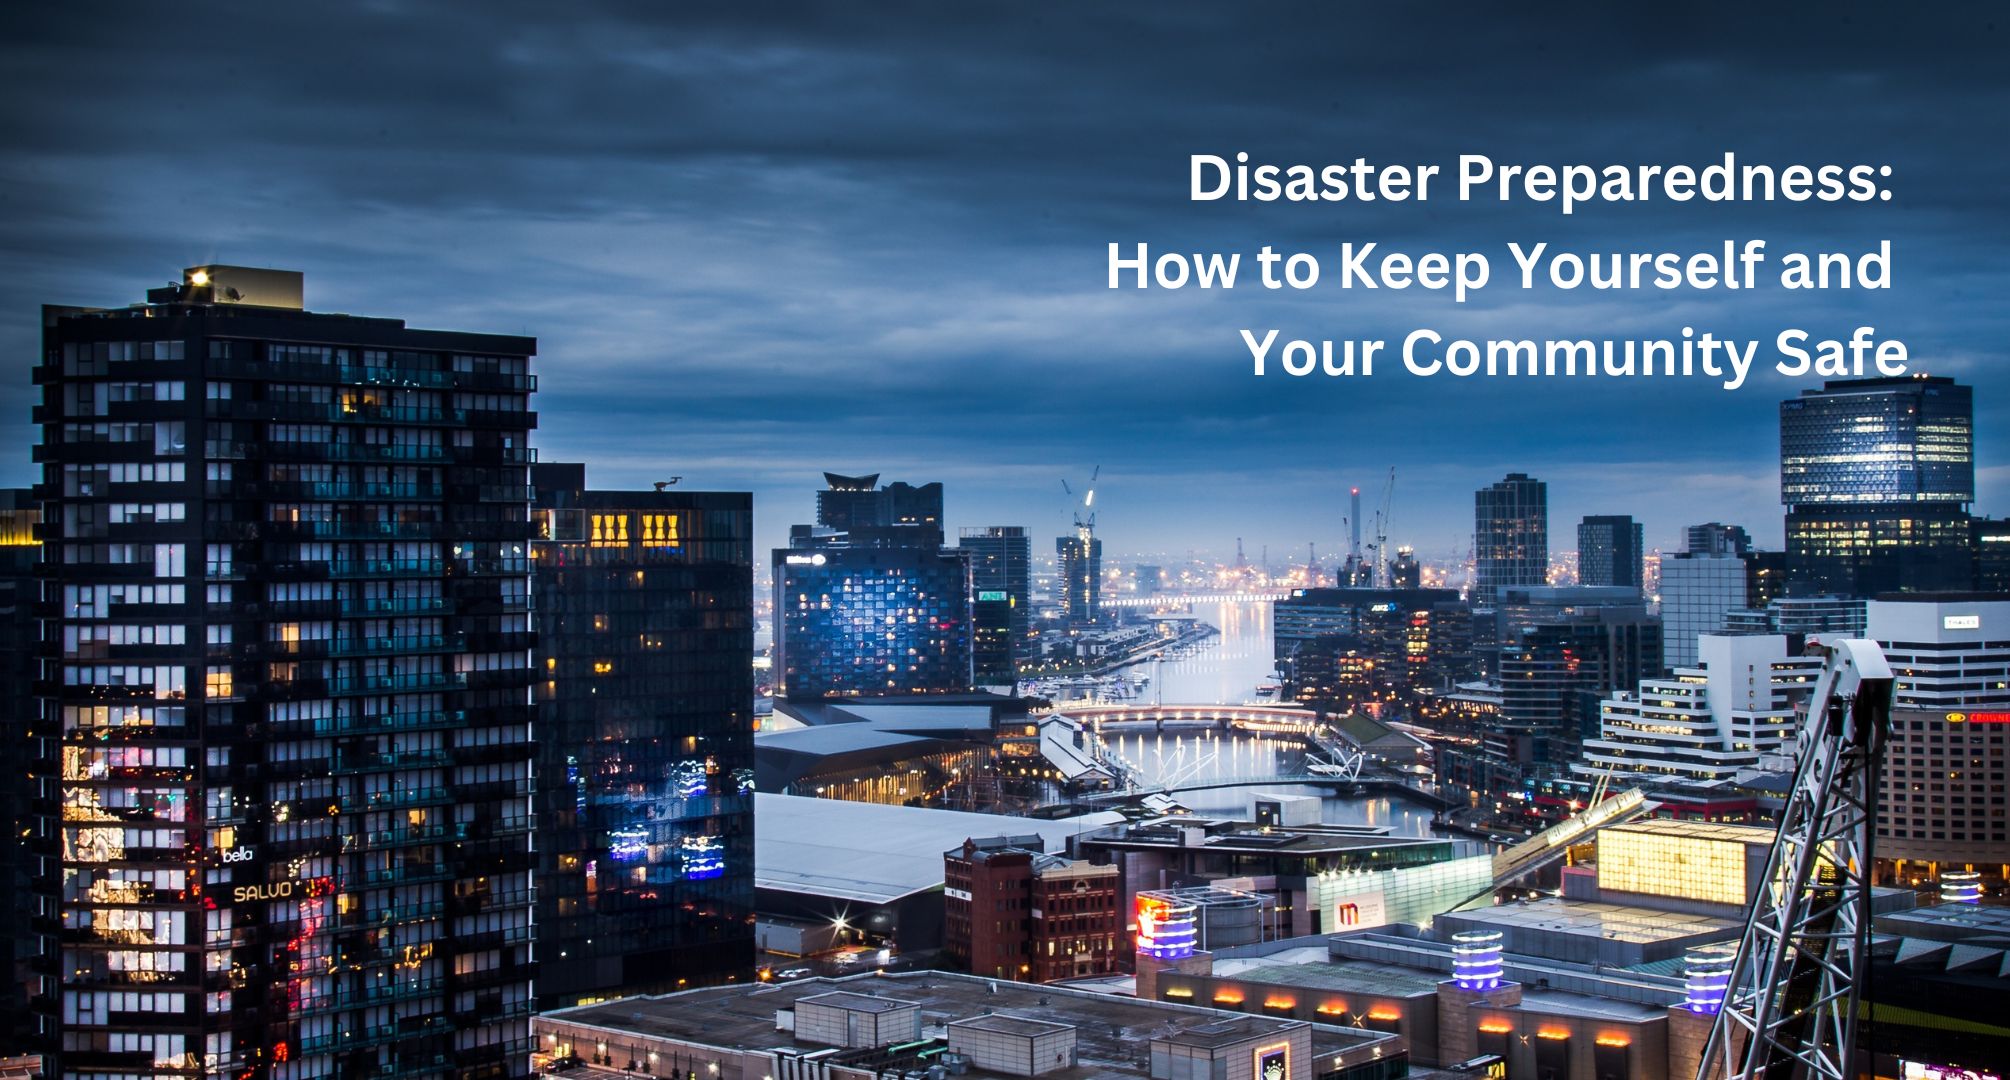 Disaster Preparedness: How to Keep Yourself and Your Community Safe